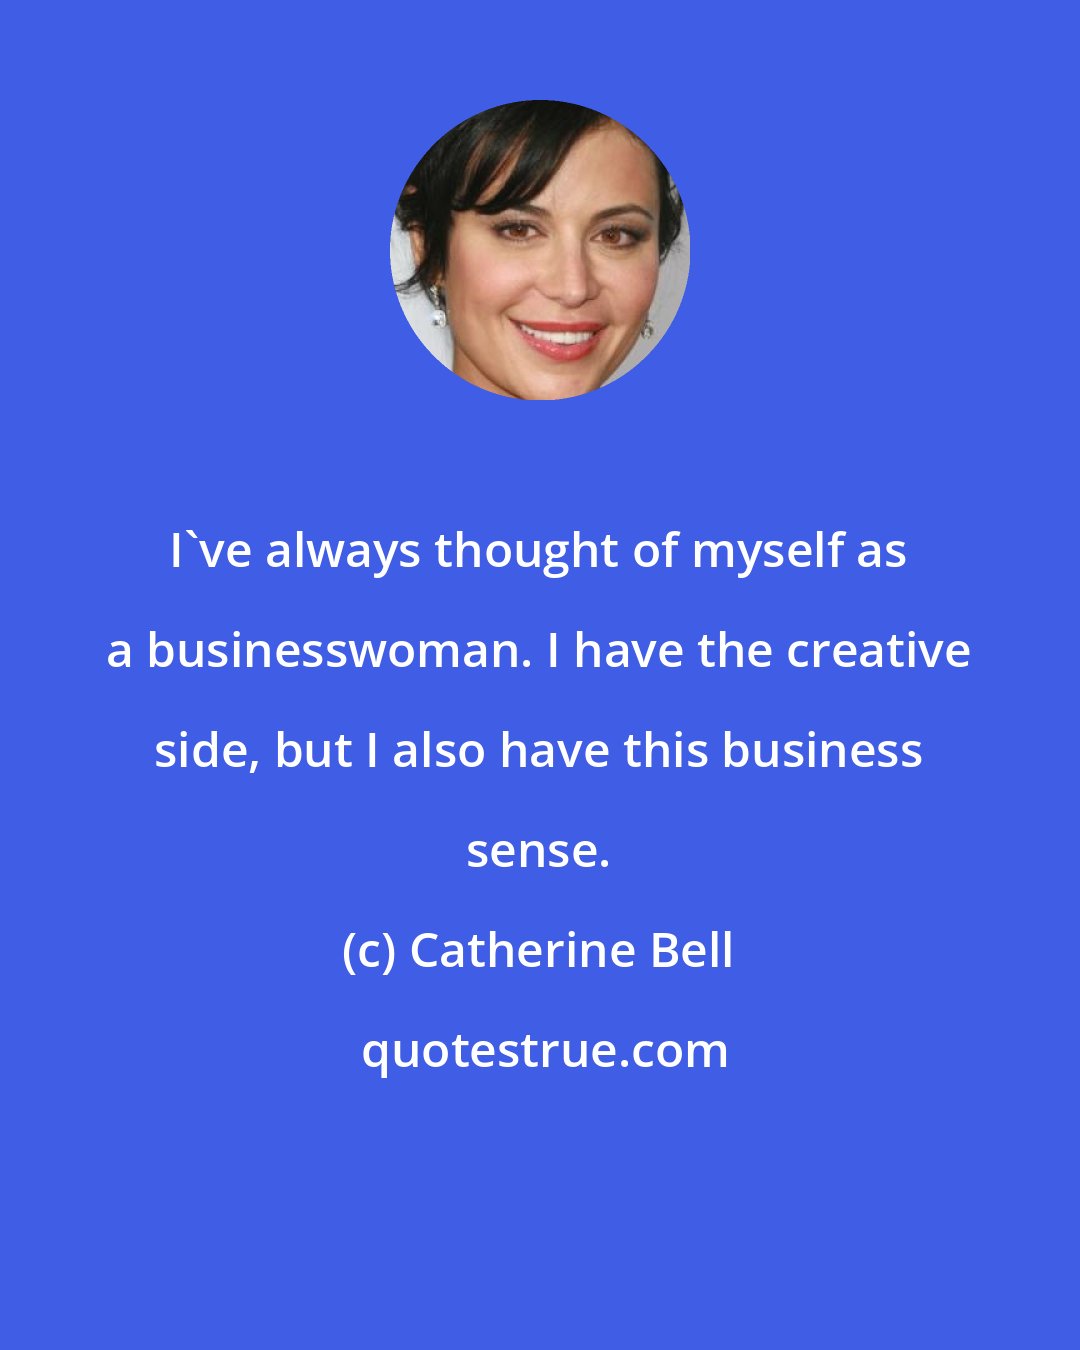 Catherine Bell: I've always thought of myself as a businesswoman. I have the creative side, but I also have this business sense.